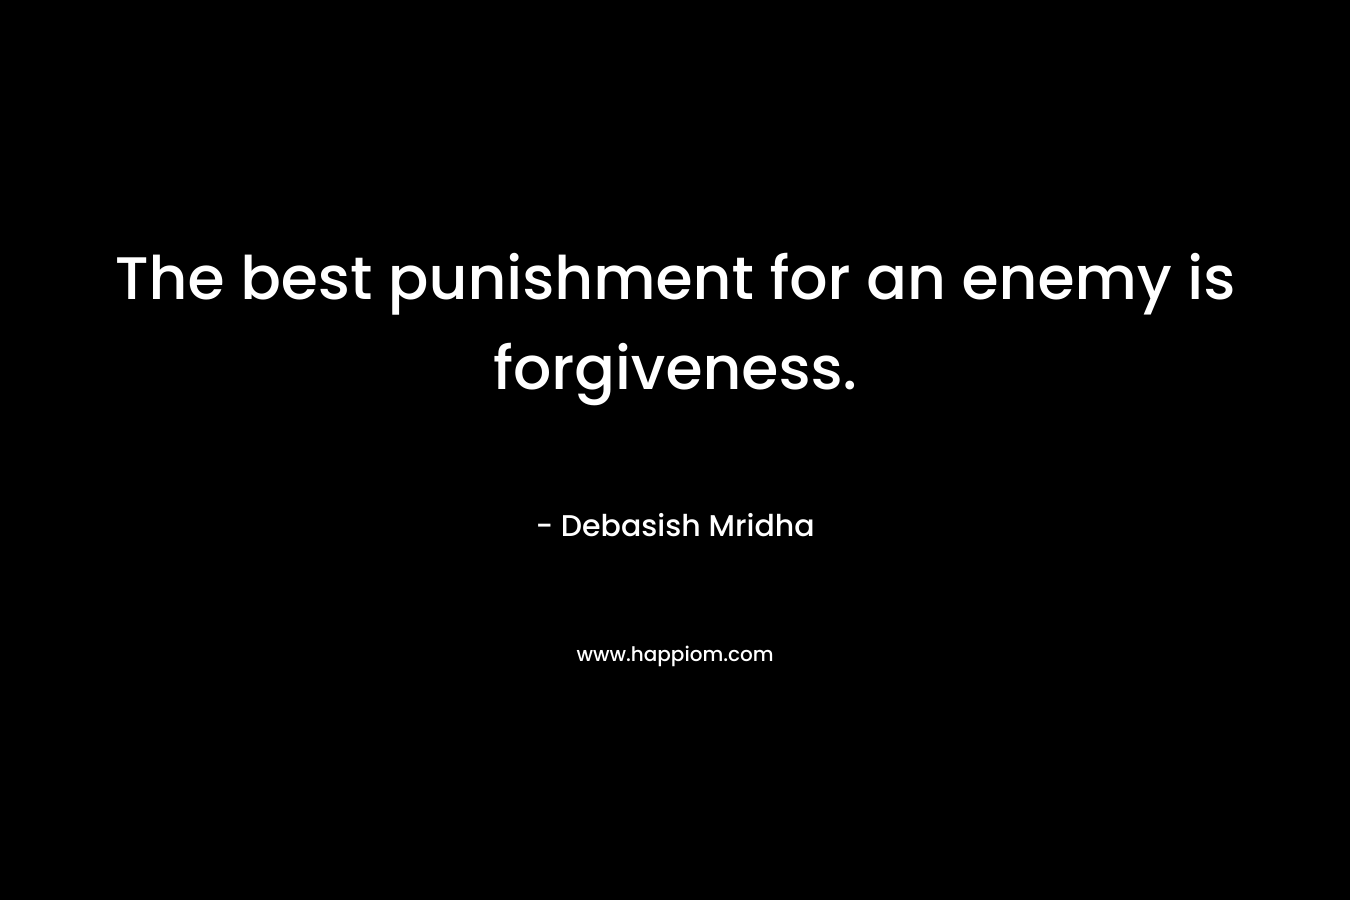 The best punishment for an enemy is forgiveness.